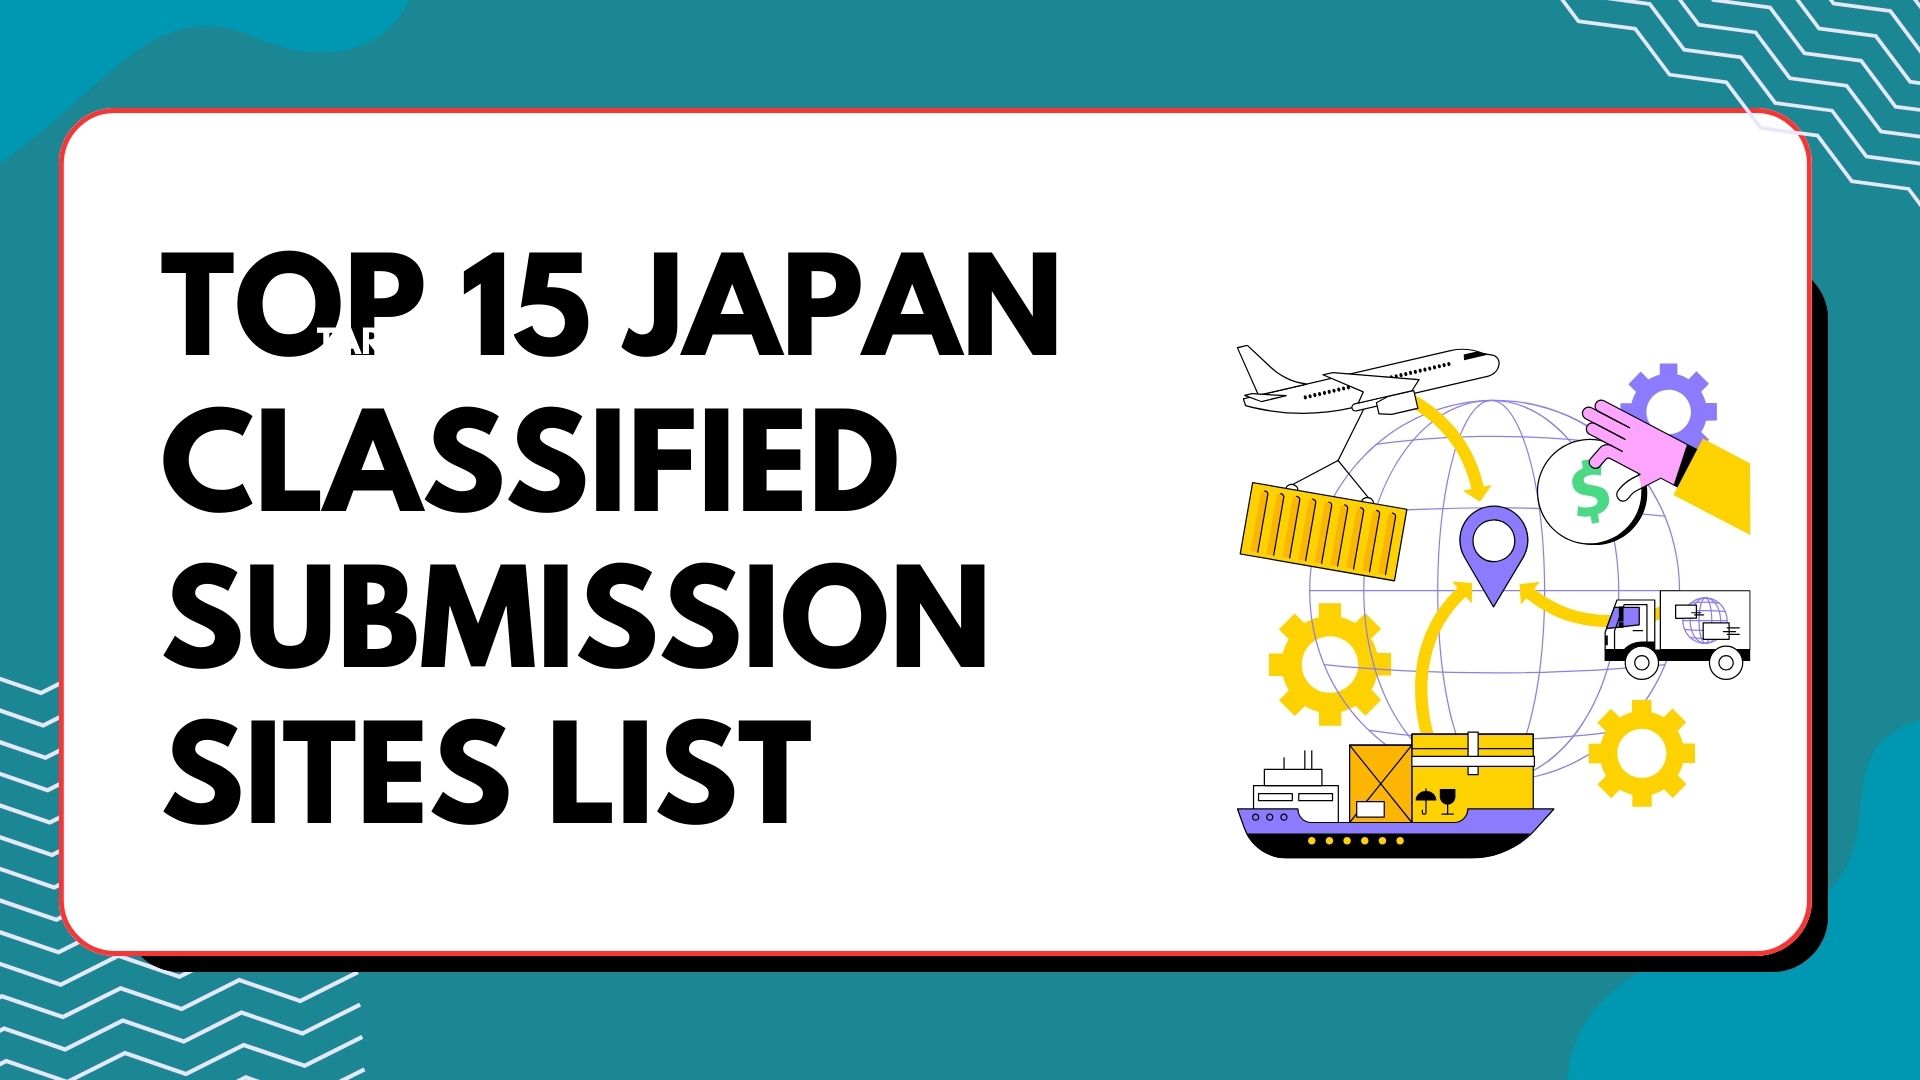 Top 15 Japan Classified Submission Sites list